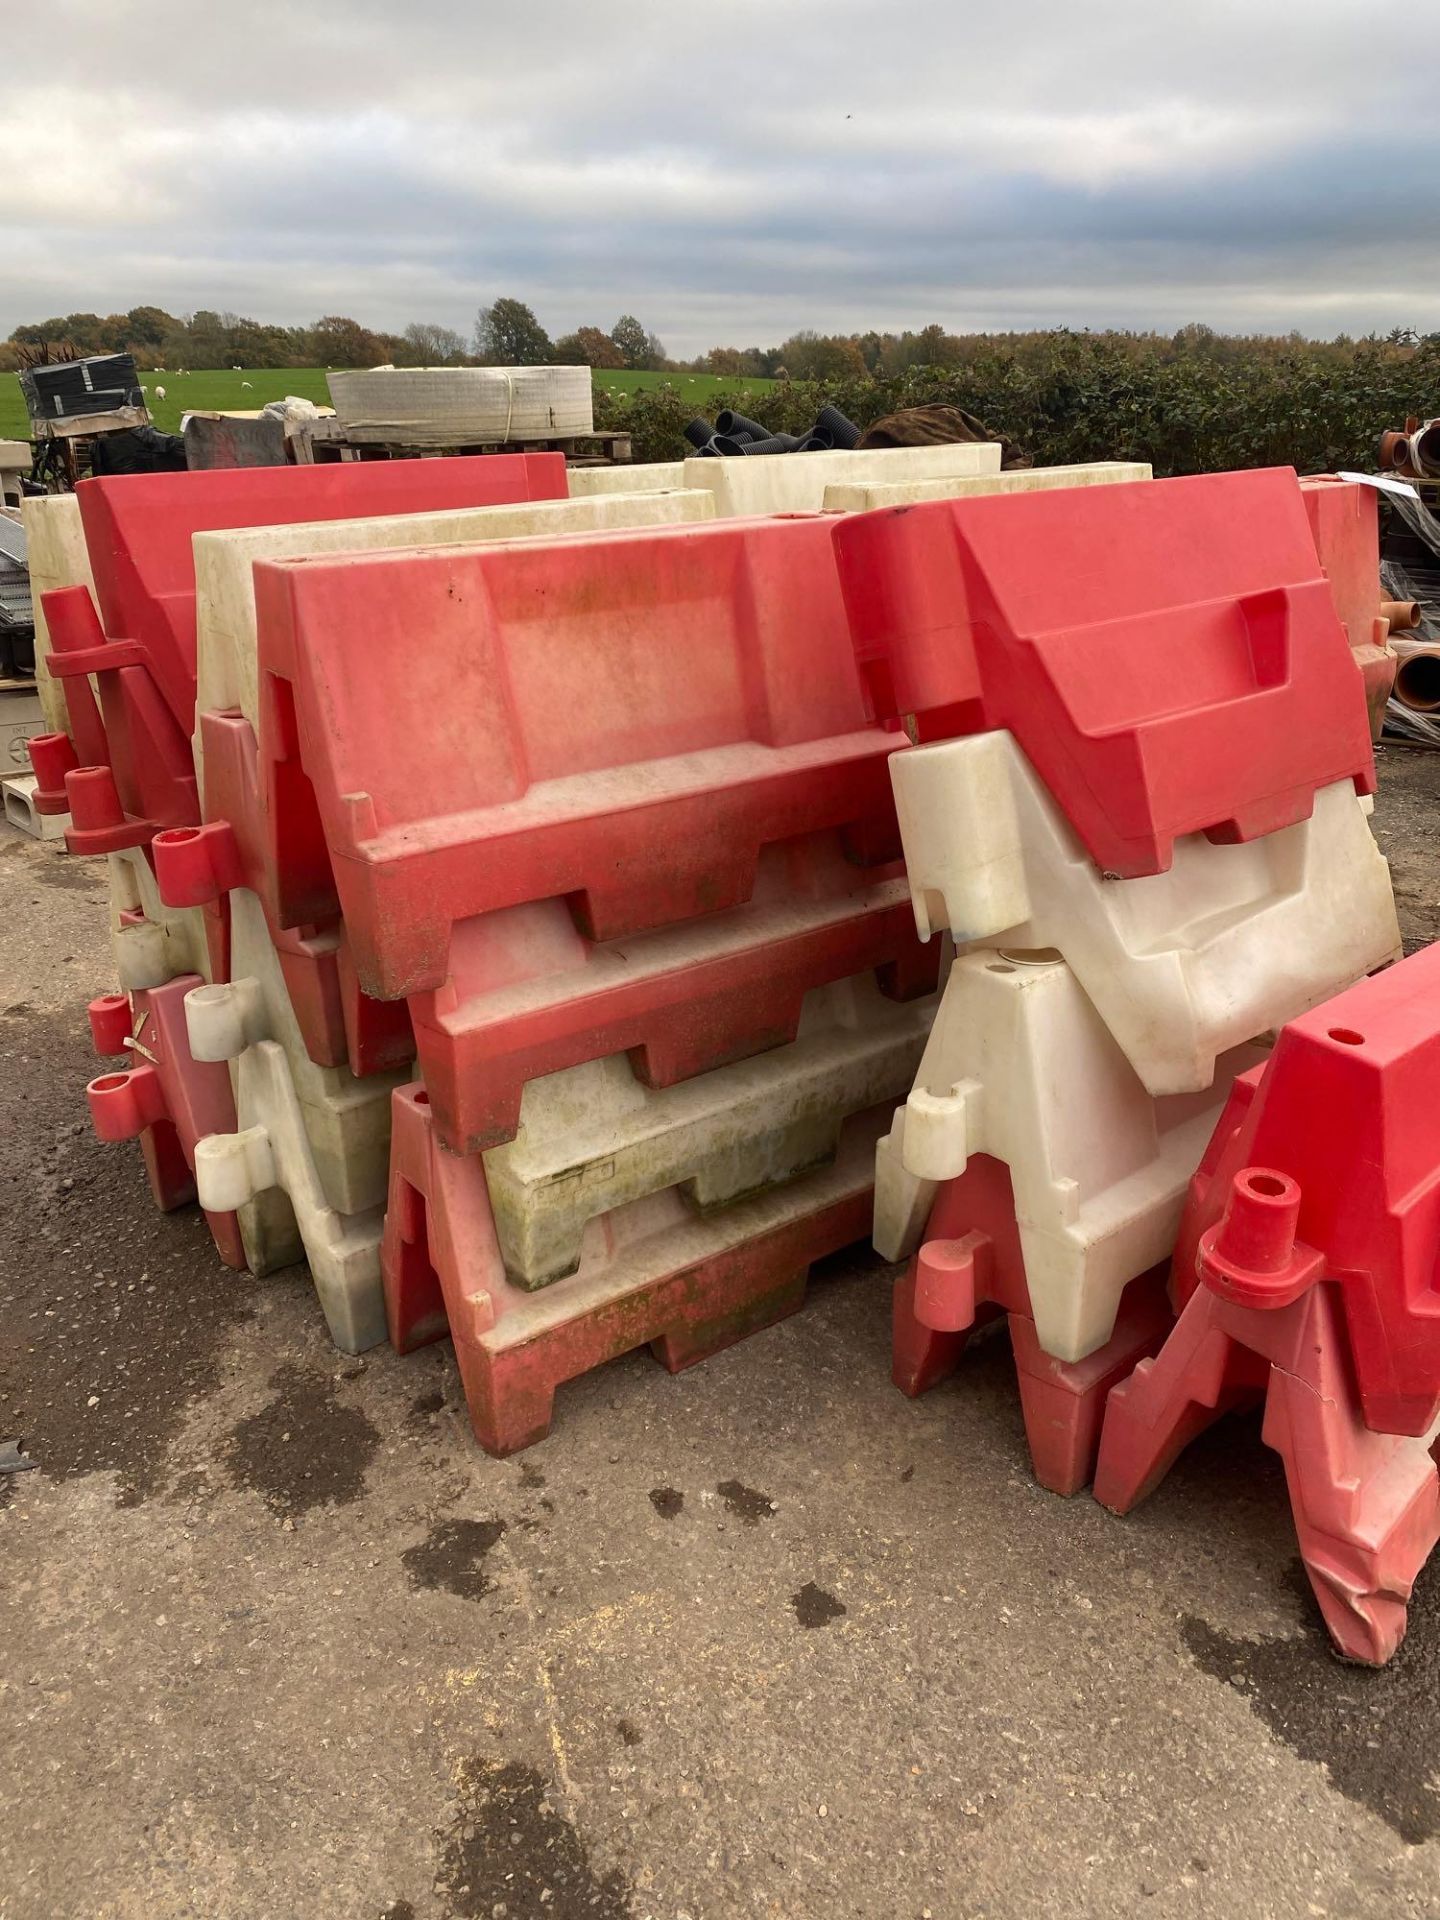 38 Red and white road barriers - Image 2 of 3